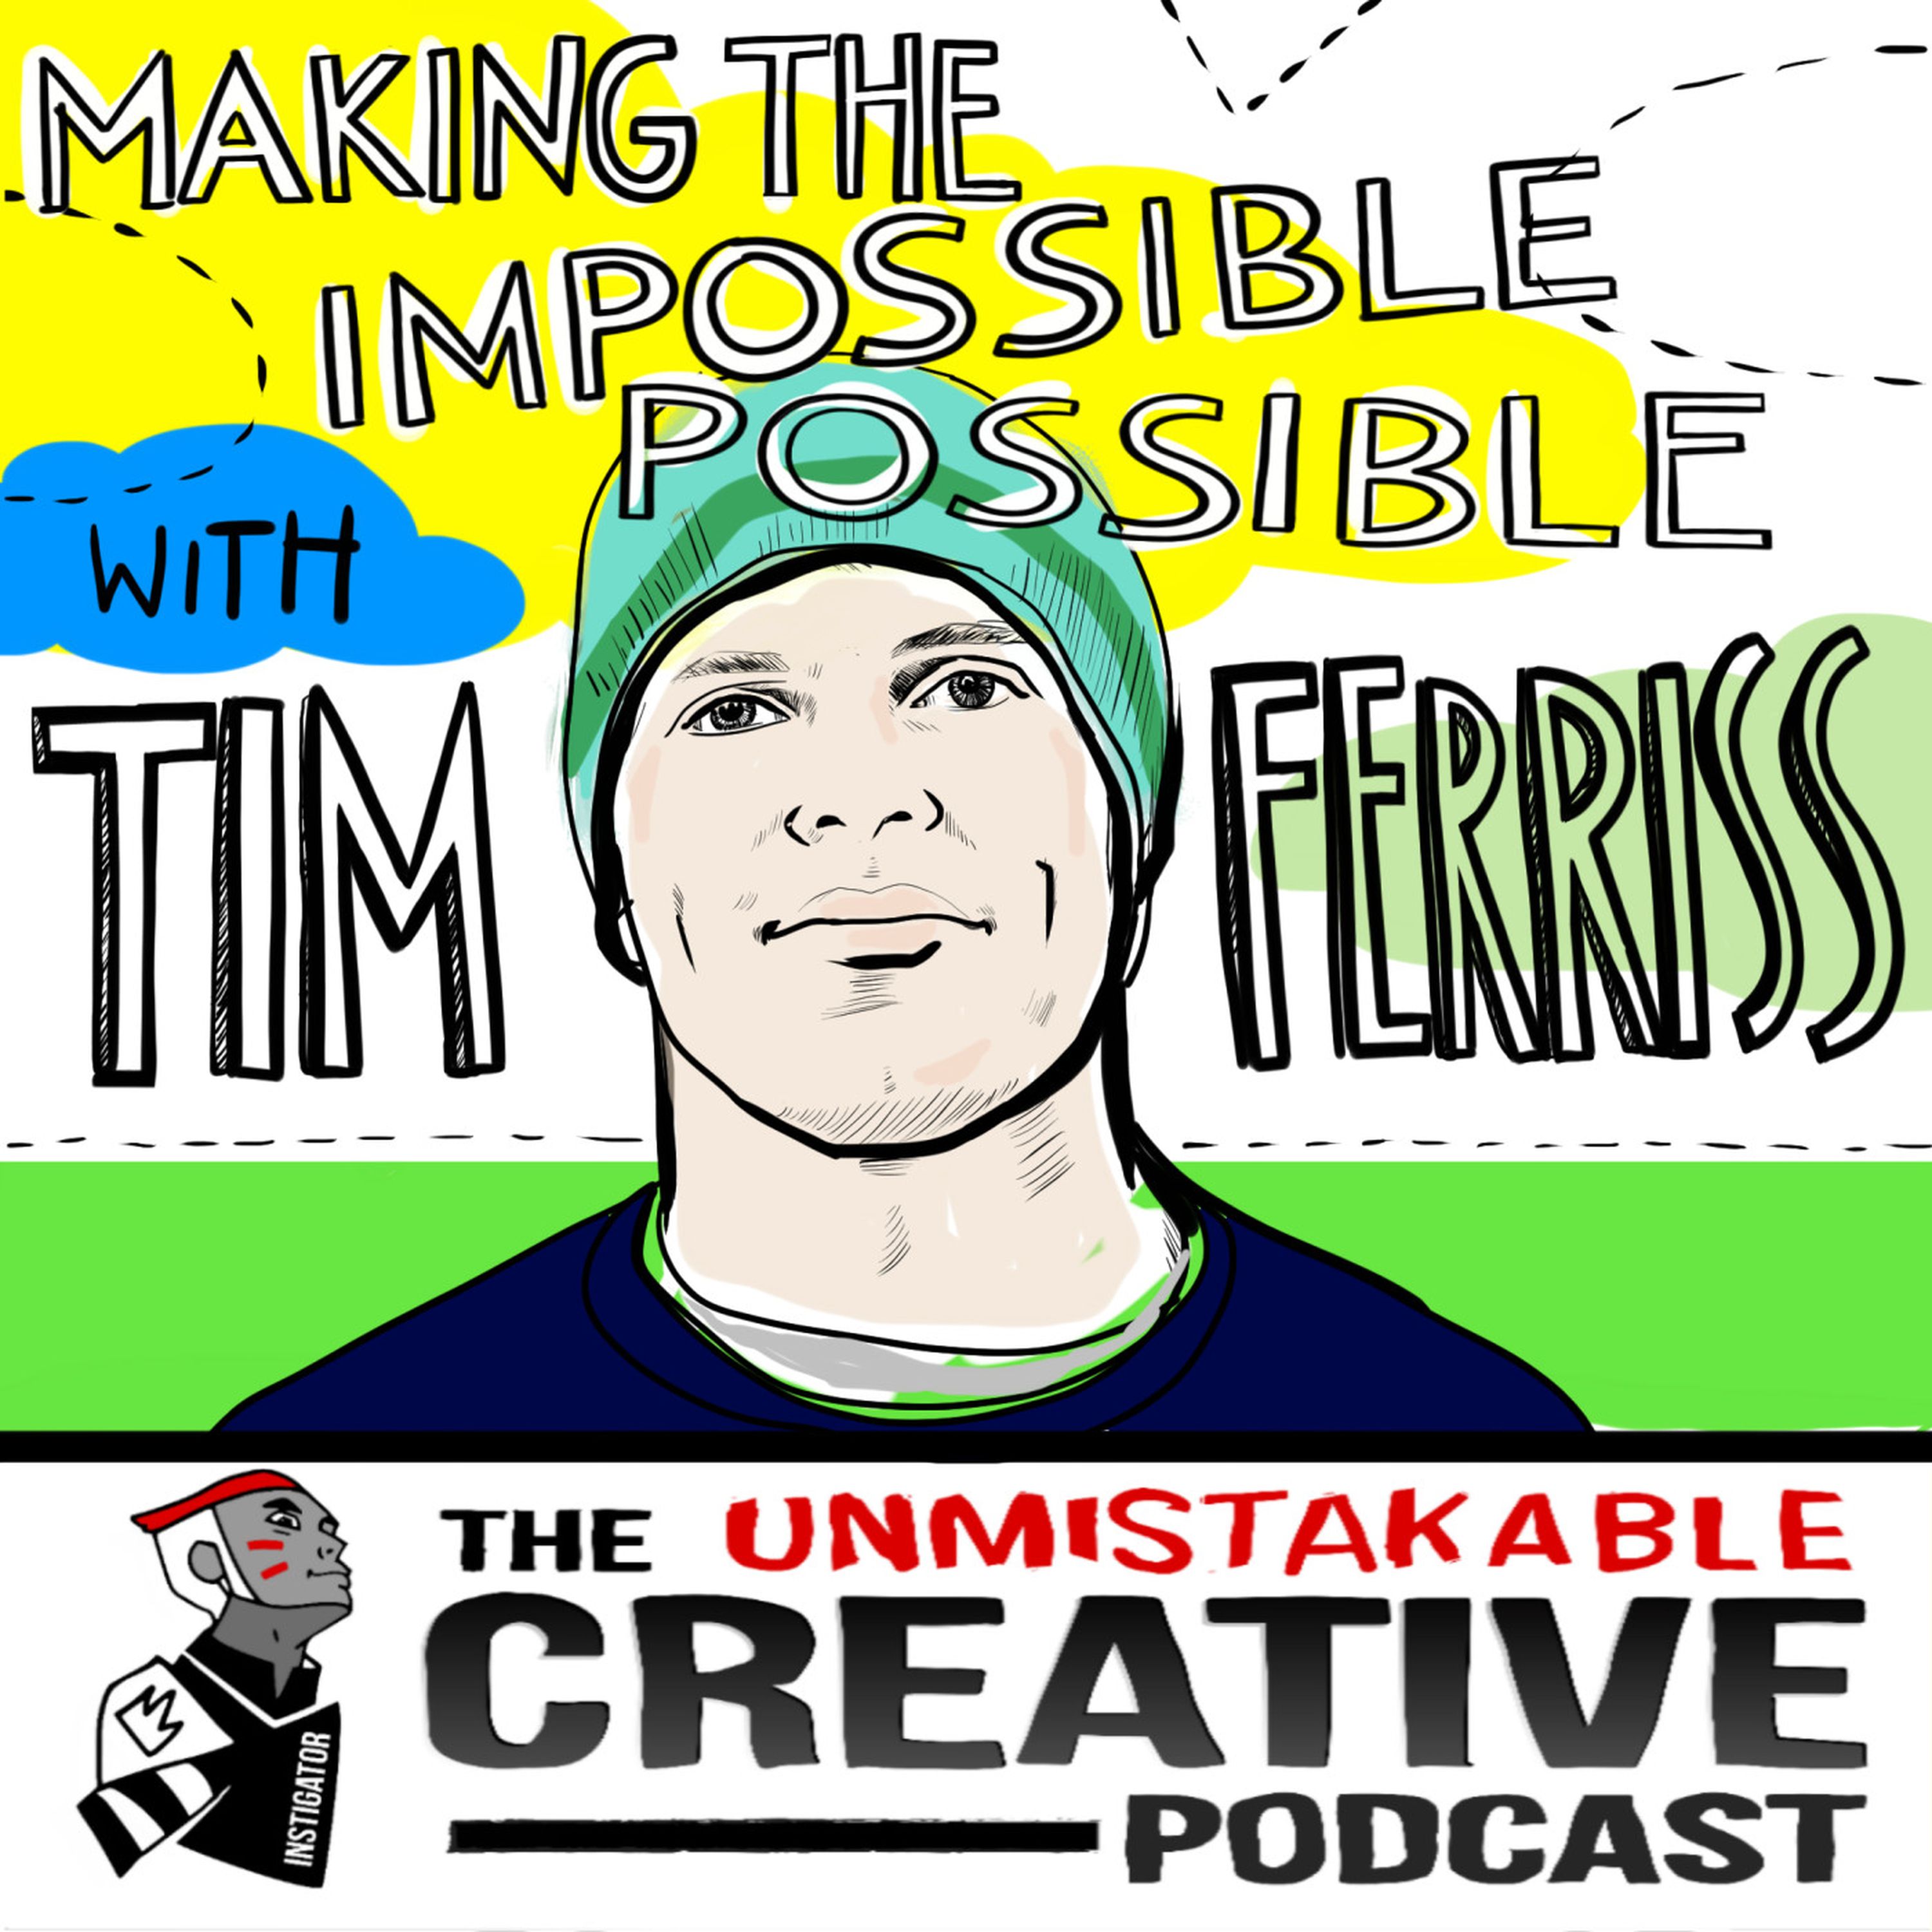 Episode image for Making the Impossible Possible with Tim Ferriss